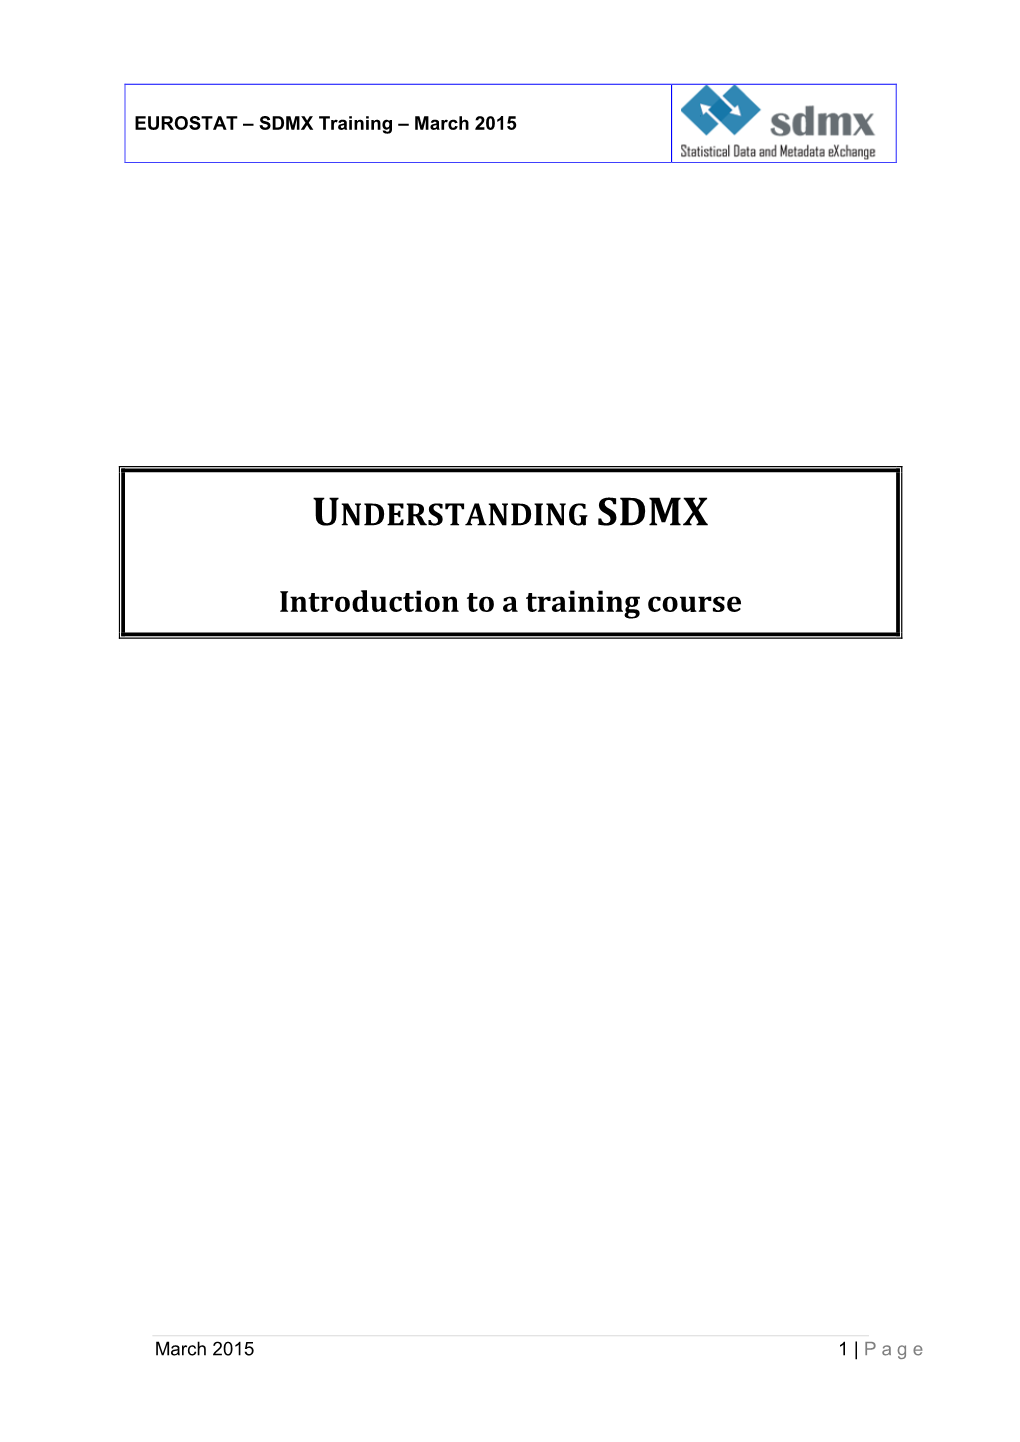 SDMX 2.1 User Guide Aims at Providing Guidance to Users of the Version 2.1 of the Technical Specification, Released in April 2011